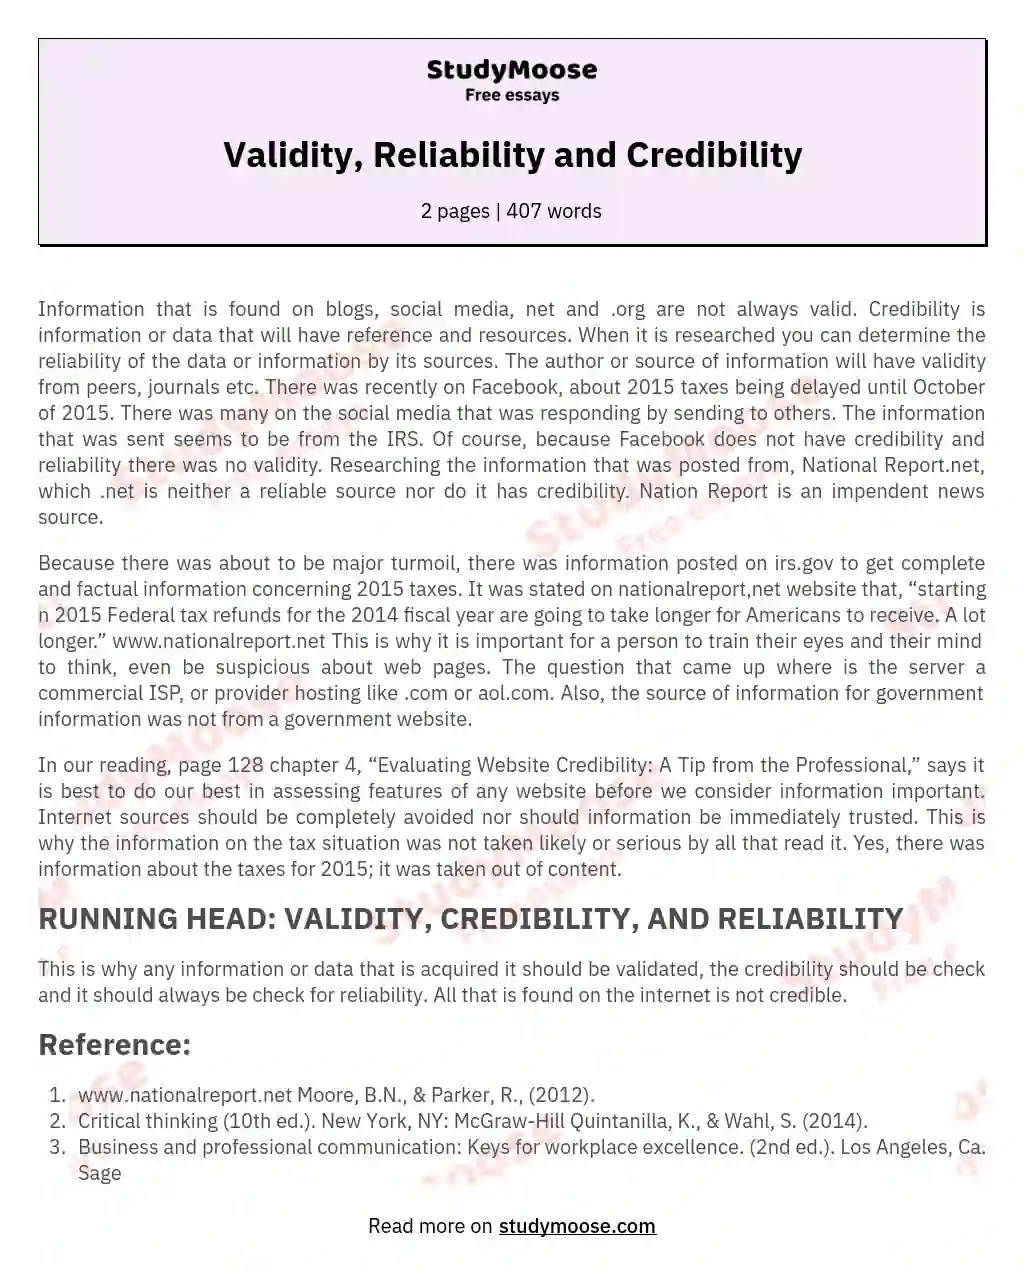 Validity, Reliability and Credibility